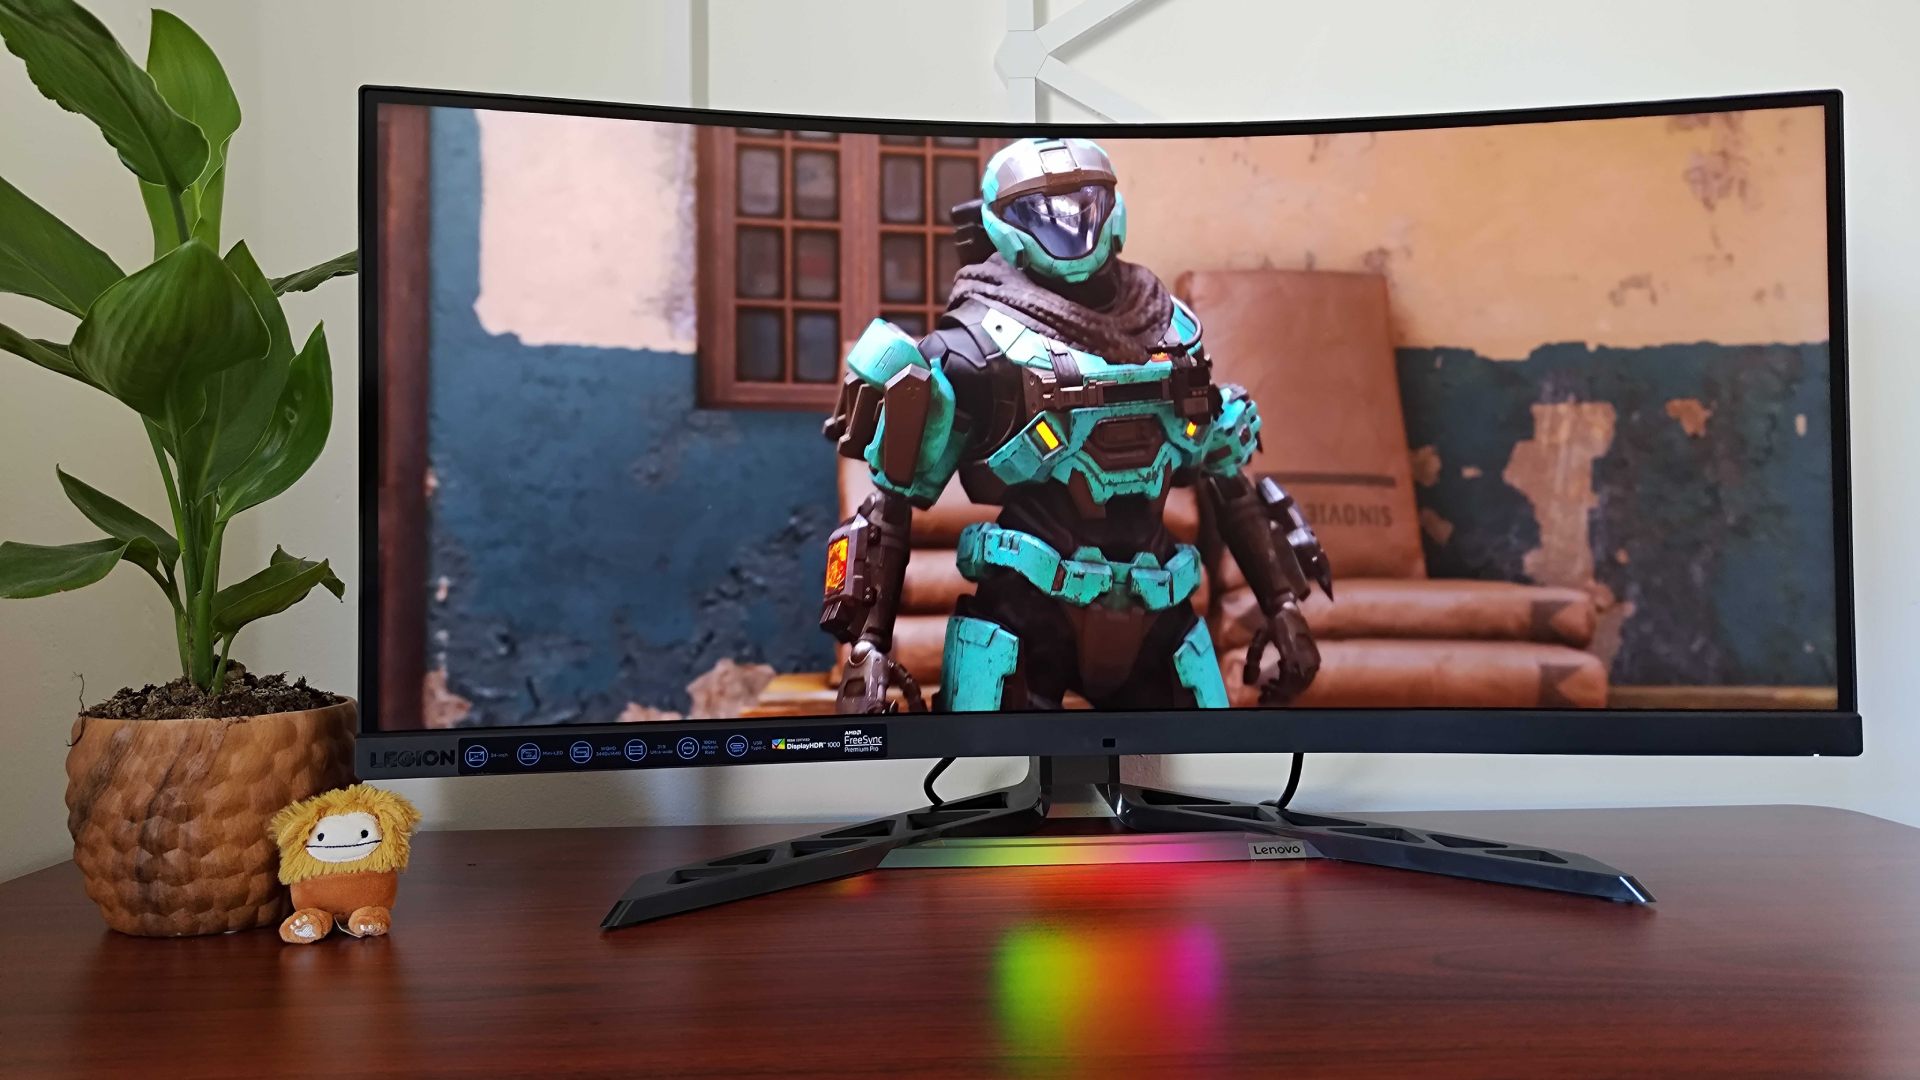 Lenovo Legion Y34wz-30 with Halo Infinite multiplayer gameplay on screen with Spartan in middle